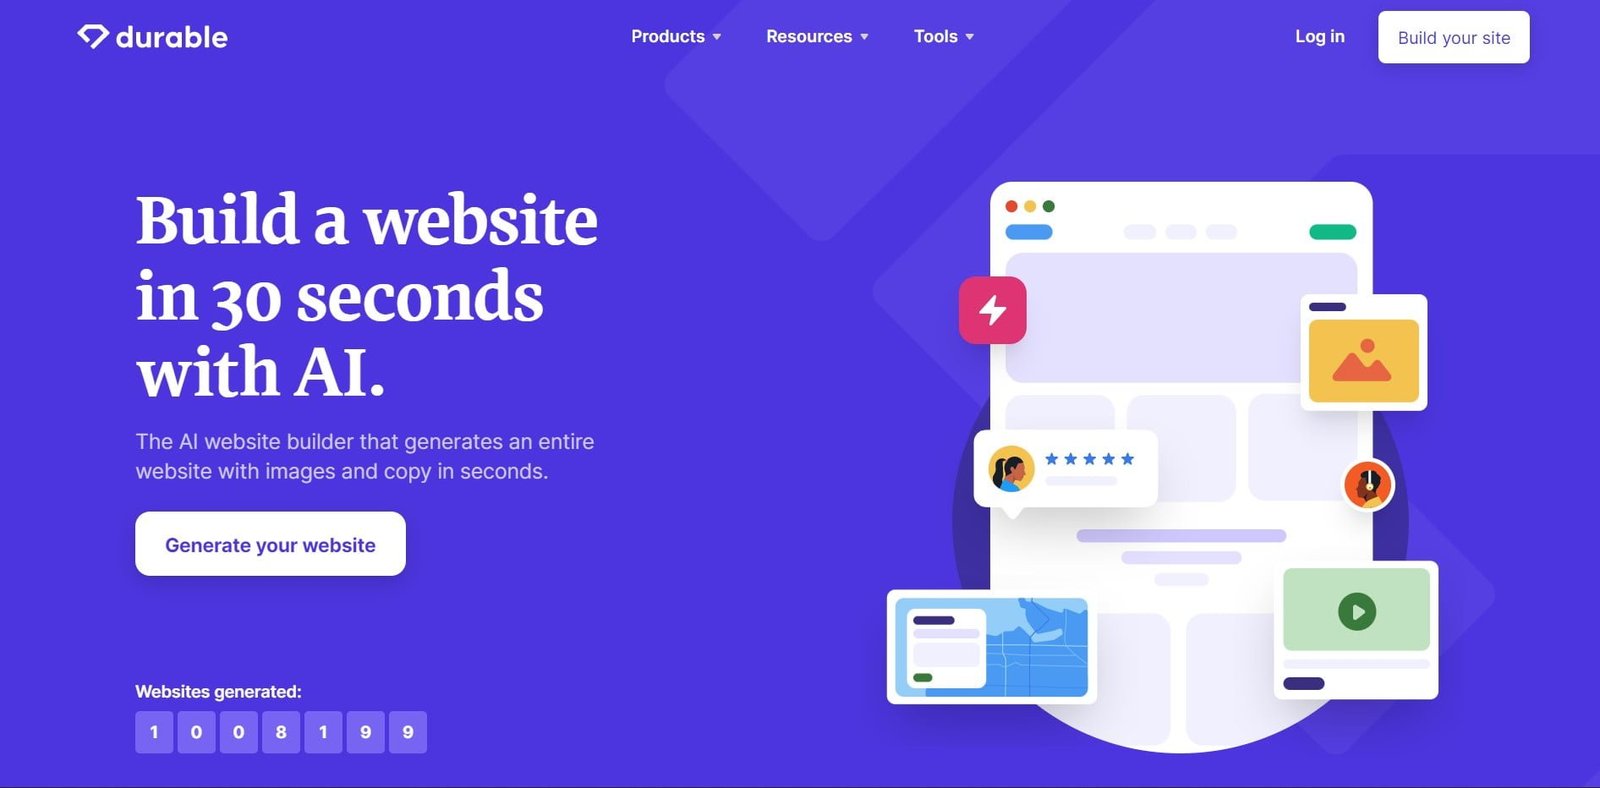 Durable is an AI-powered website builder that can create a fully-designed website in under a minute